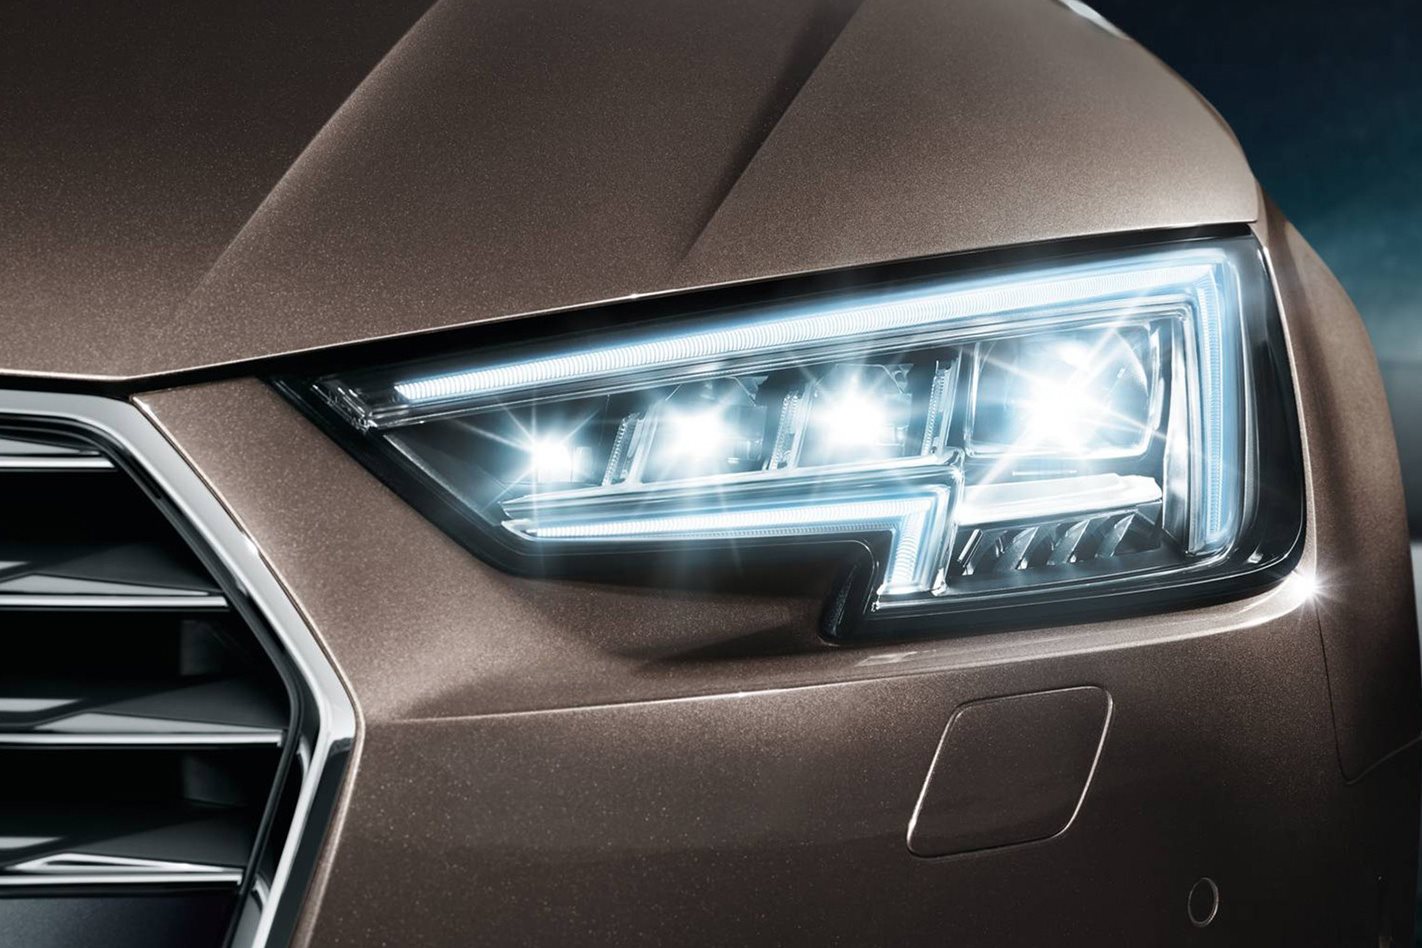 New Headlights Tips And Tricks To Enhance Your Car Like A Brand New Model